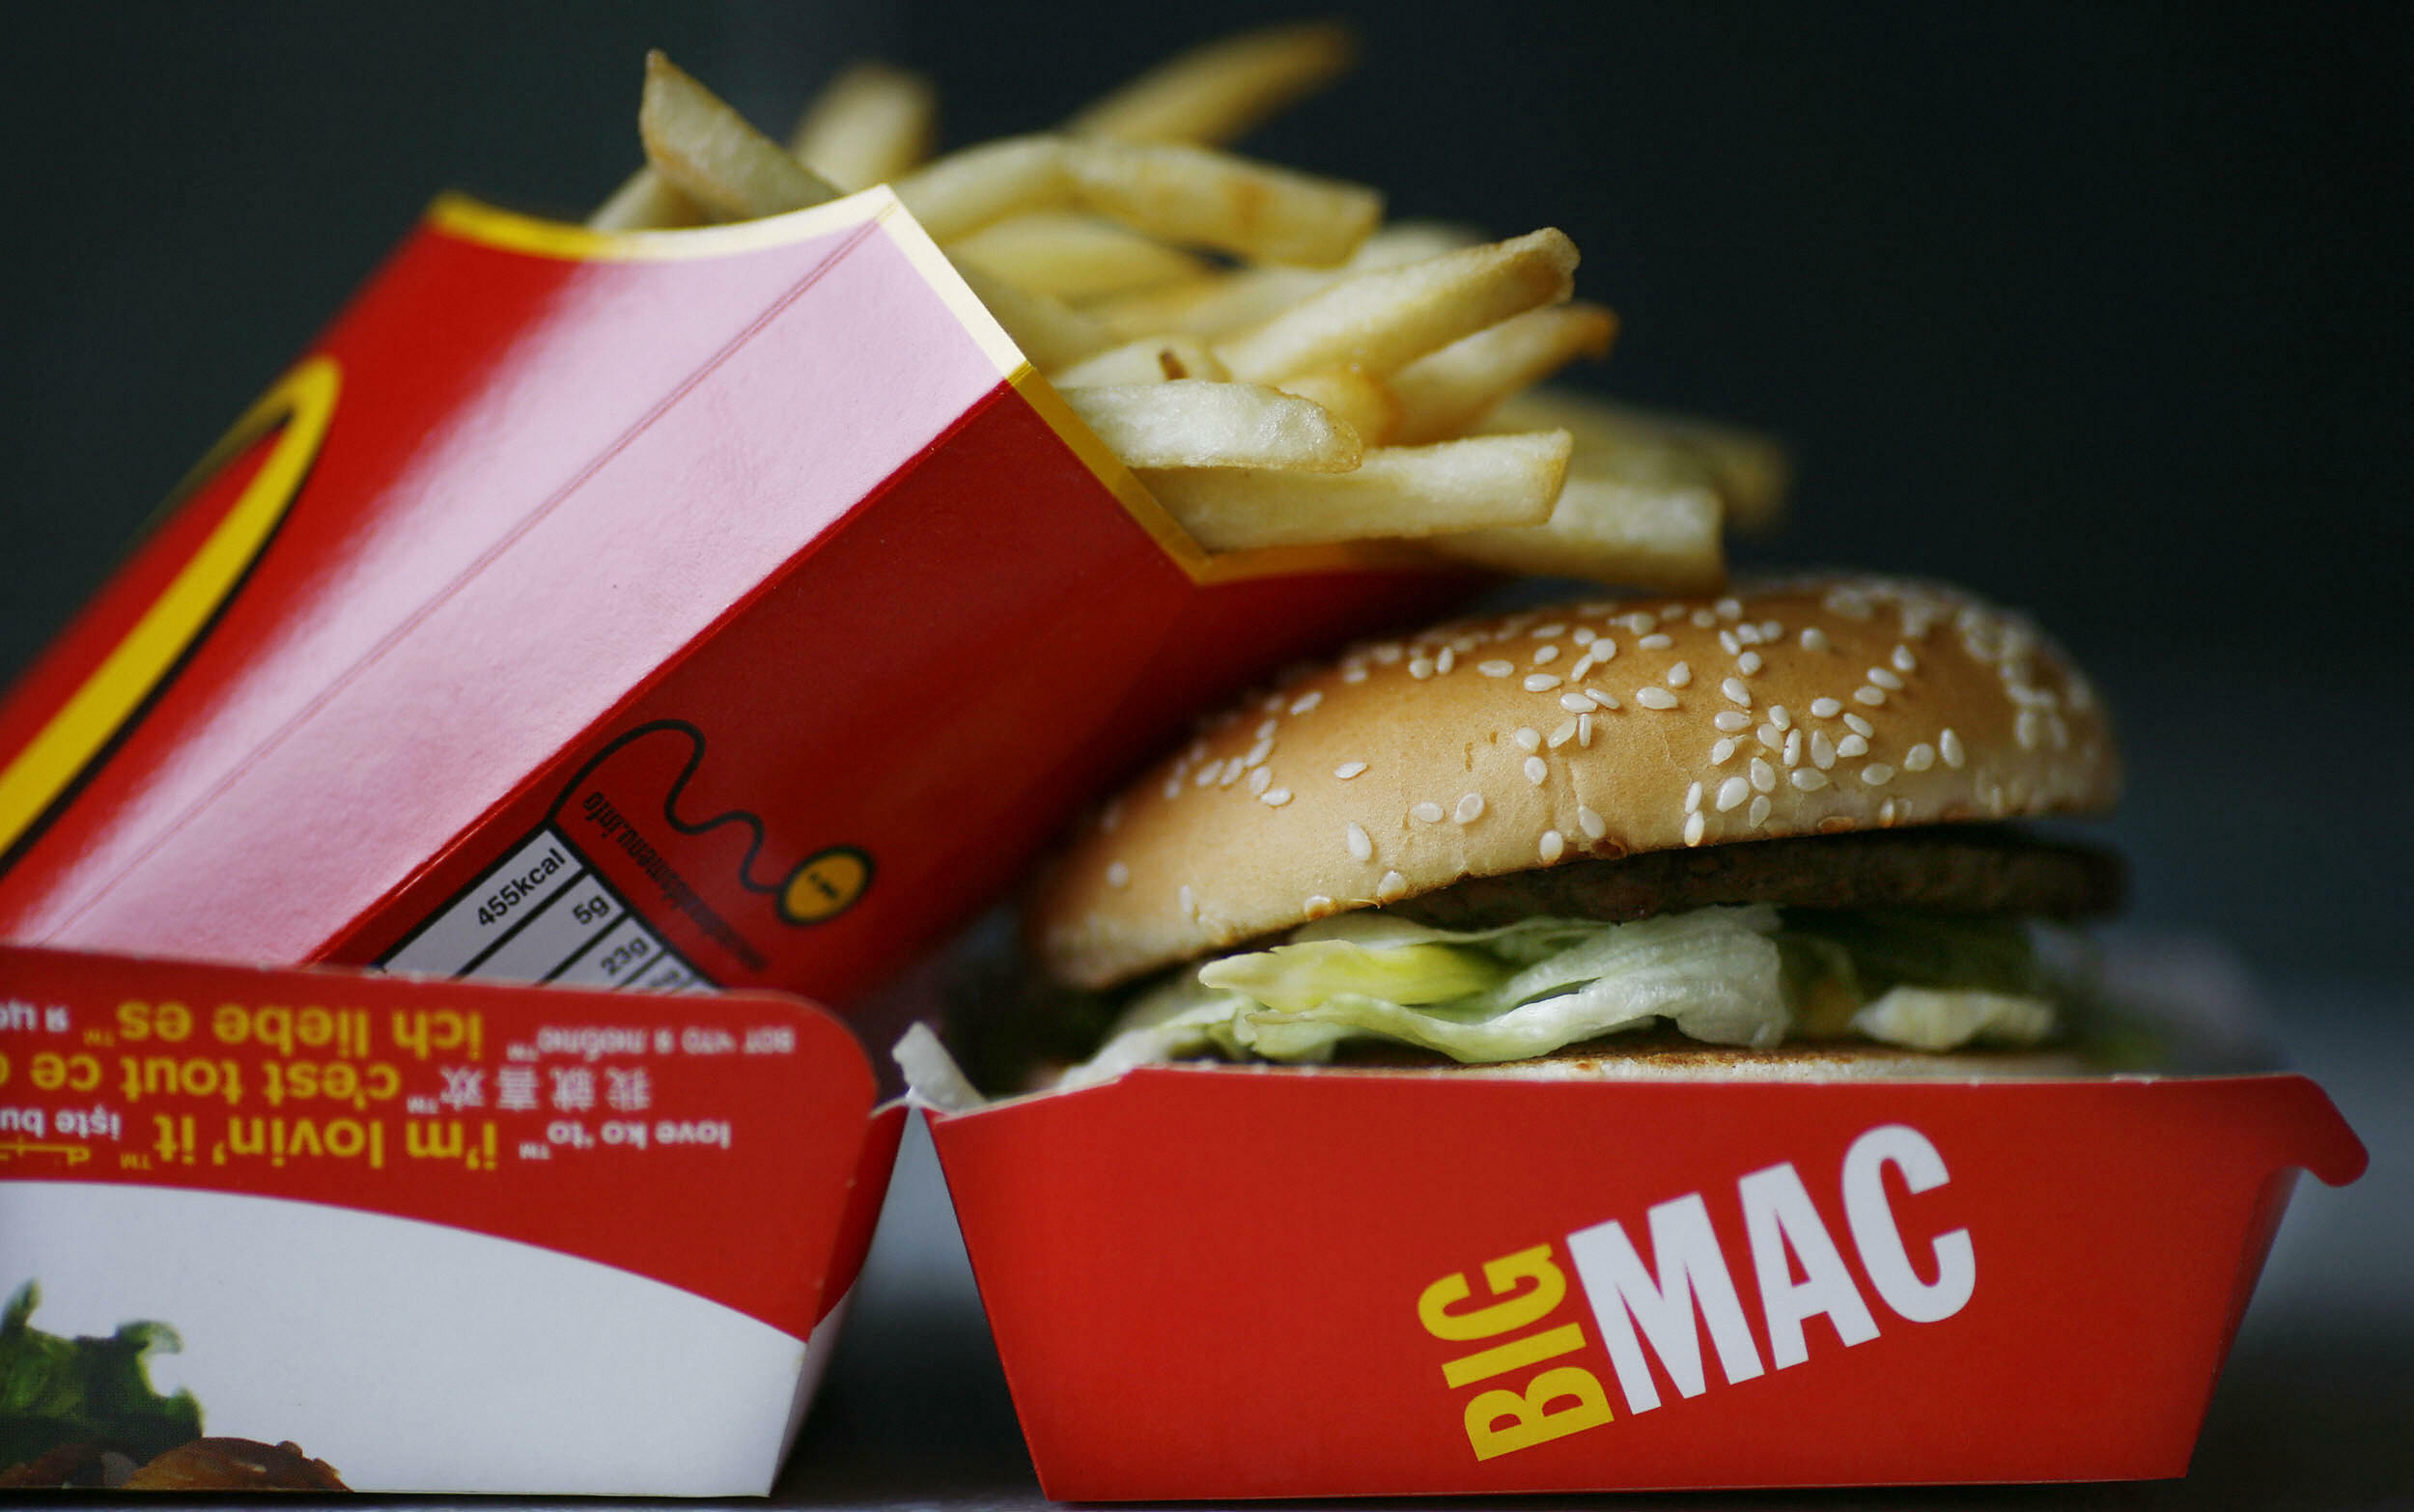 A Big Mac hamburger and french fries are pictured in a McDonalds fast food store in Central London on August 6, 2008. McDonald's launched a campaign on August 6 to recruit 4,000 staff in Britain to satisfy the demand from cash-strapped customers flocking 